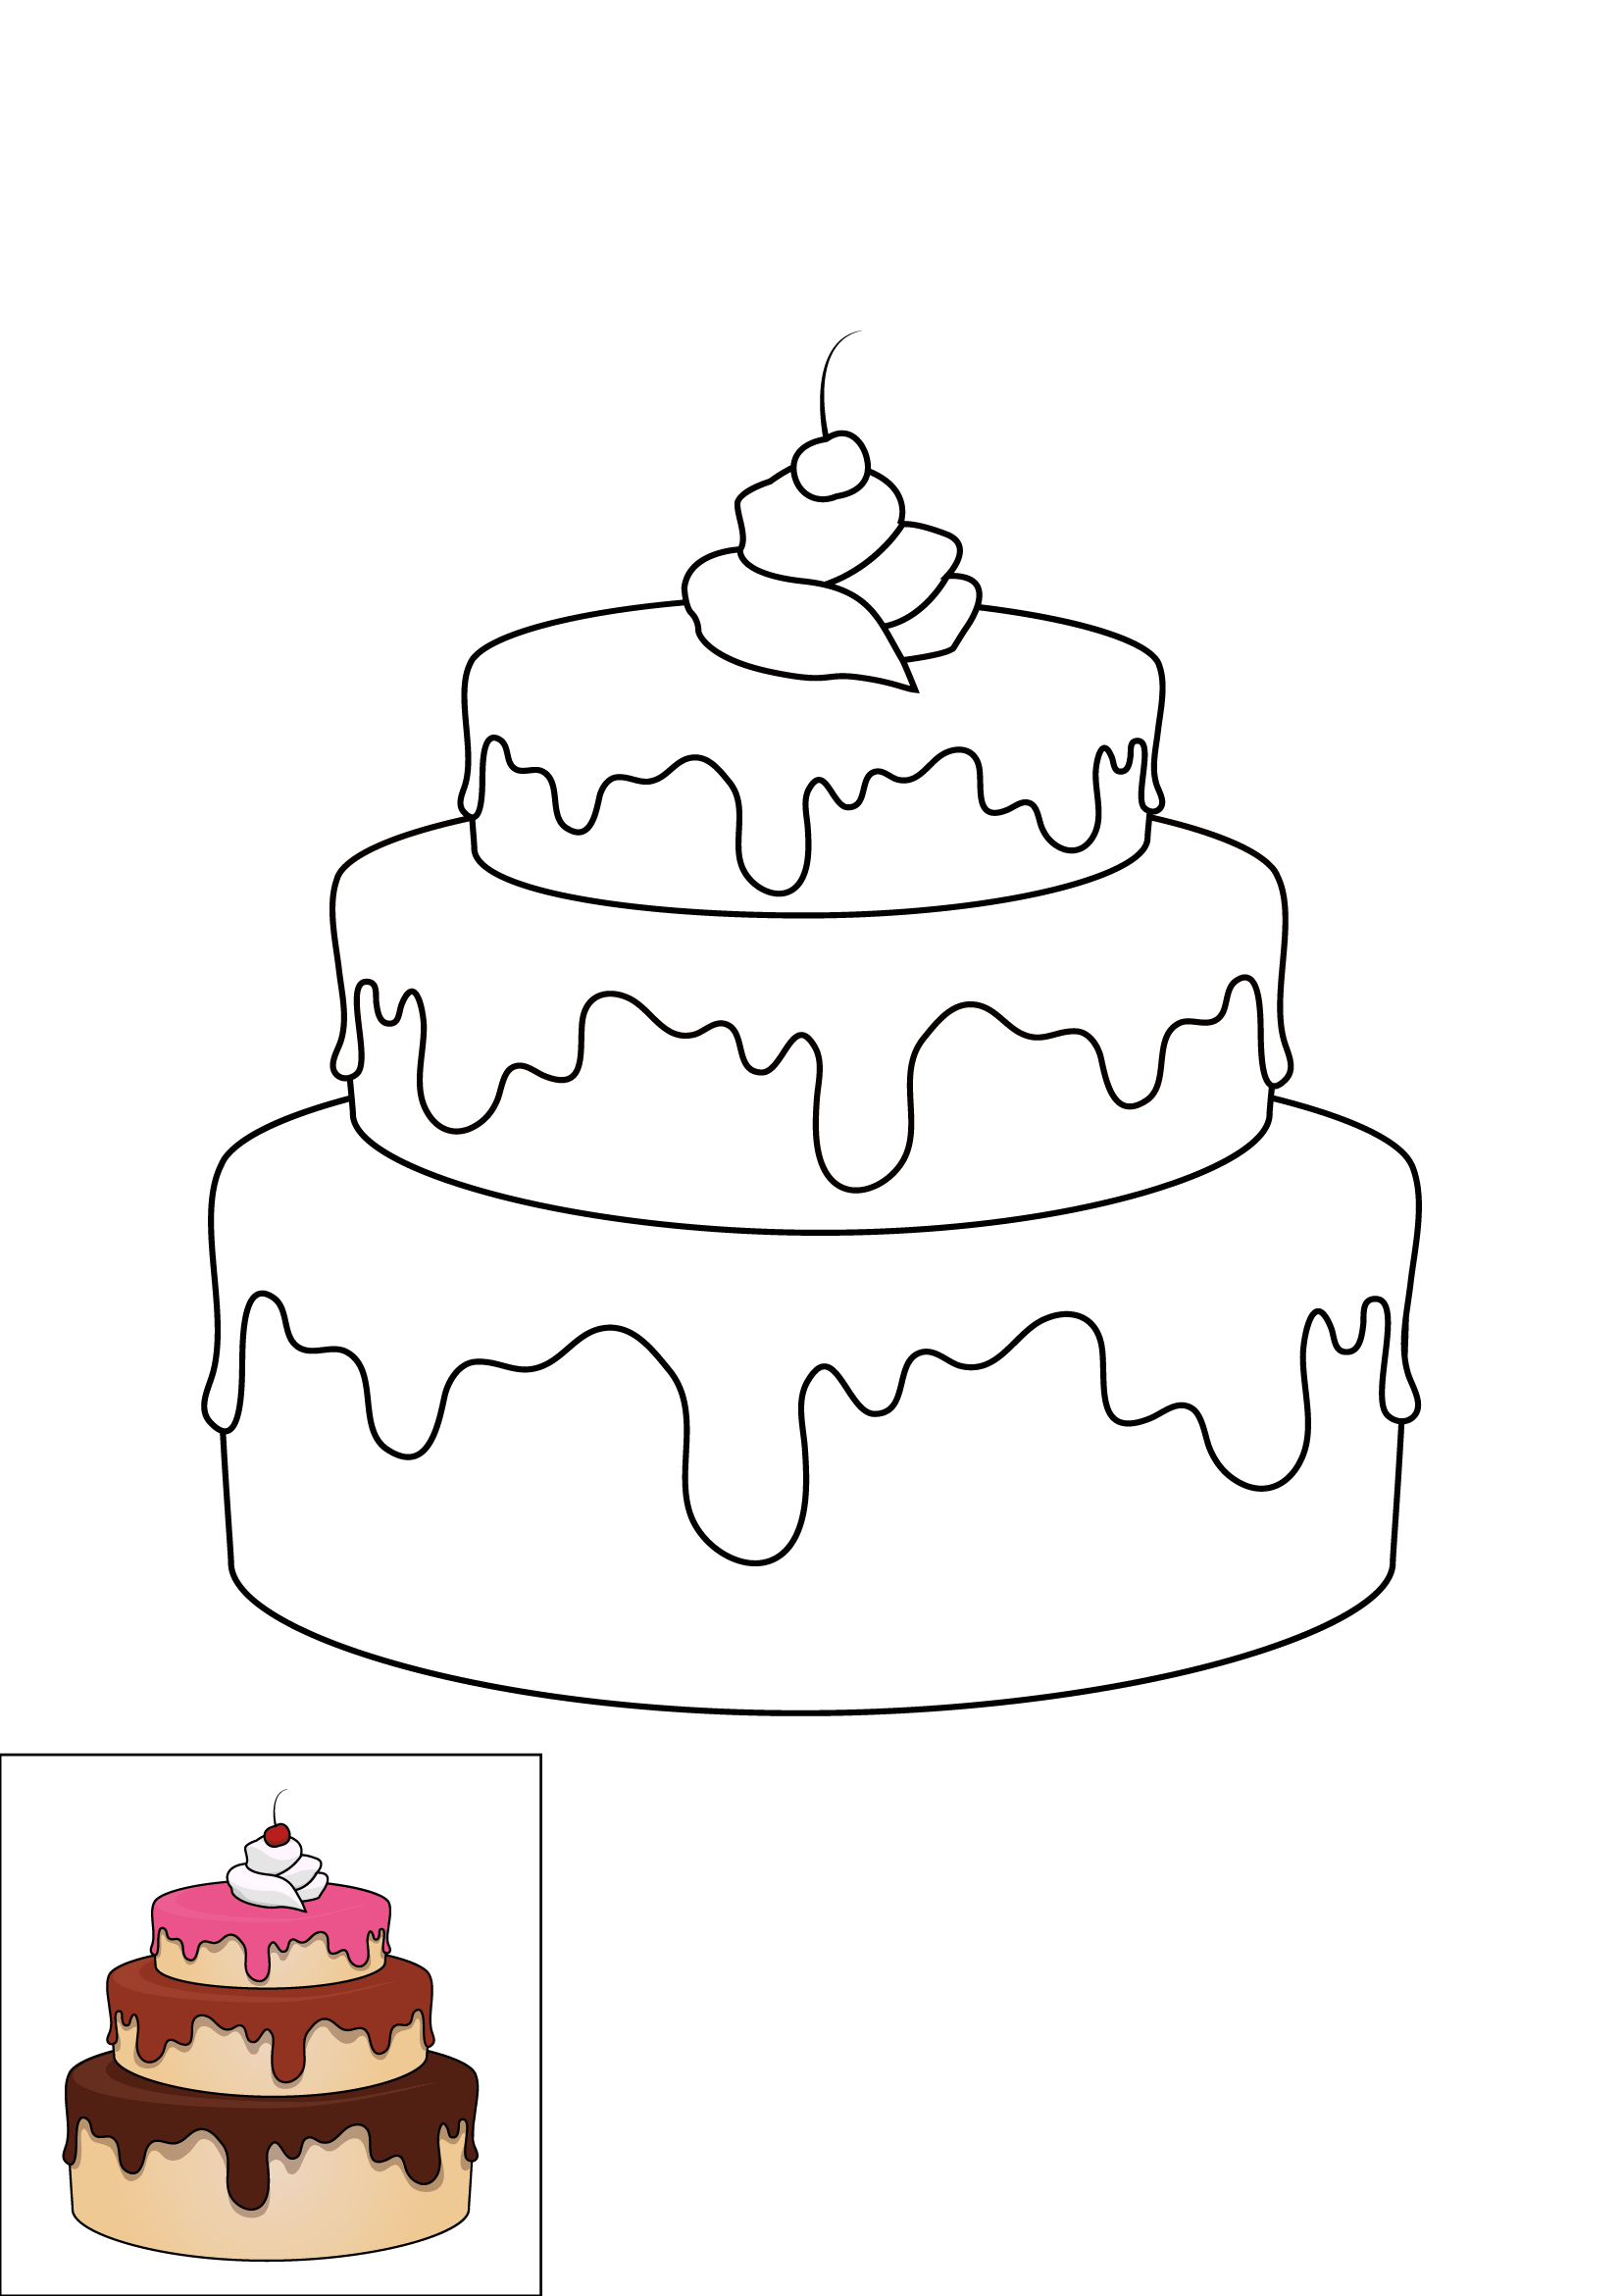 How to Draw A Cake Step by Step Printable Color